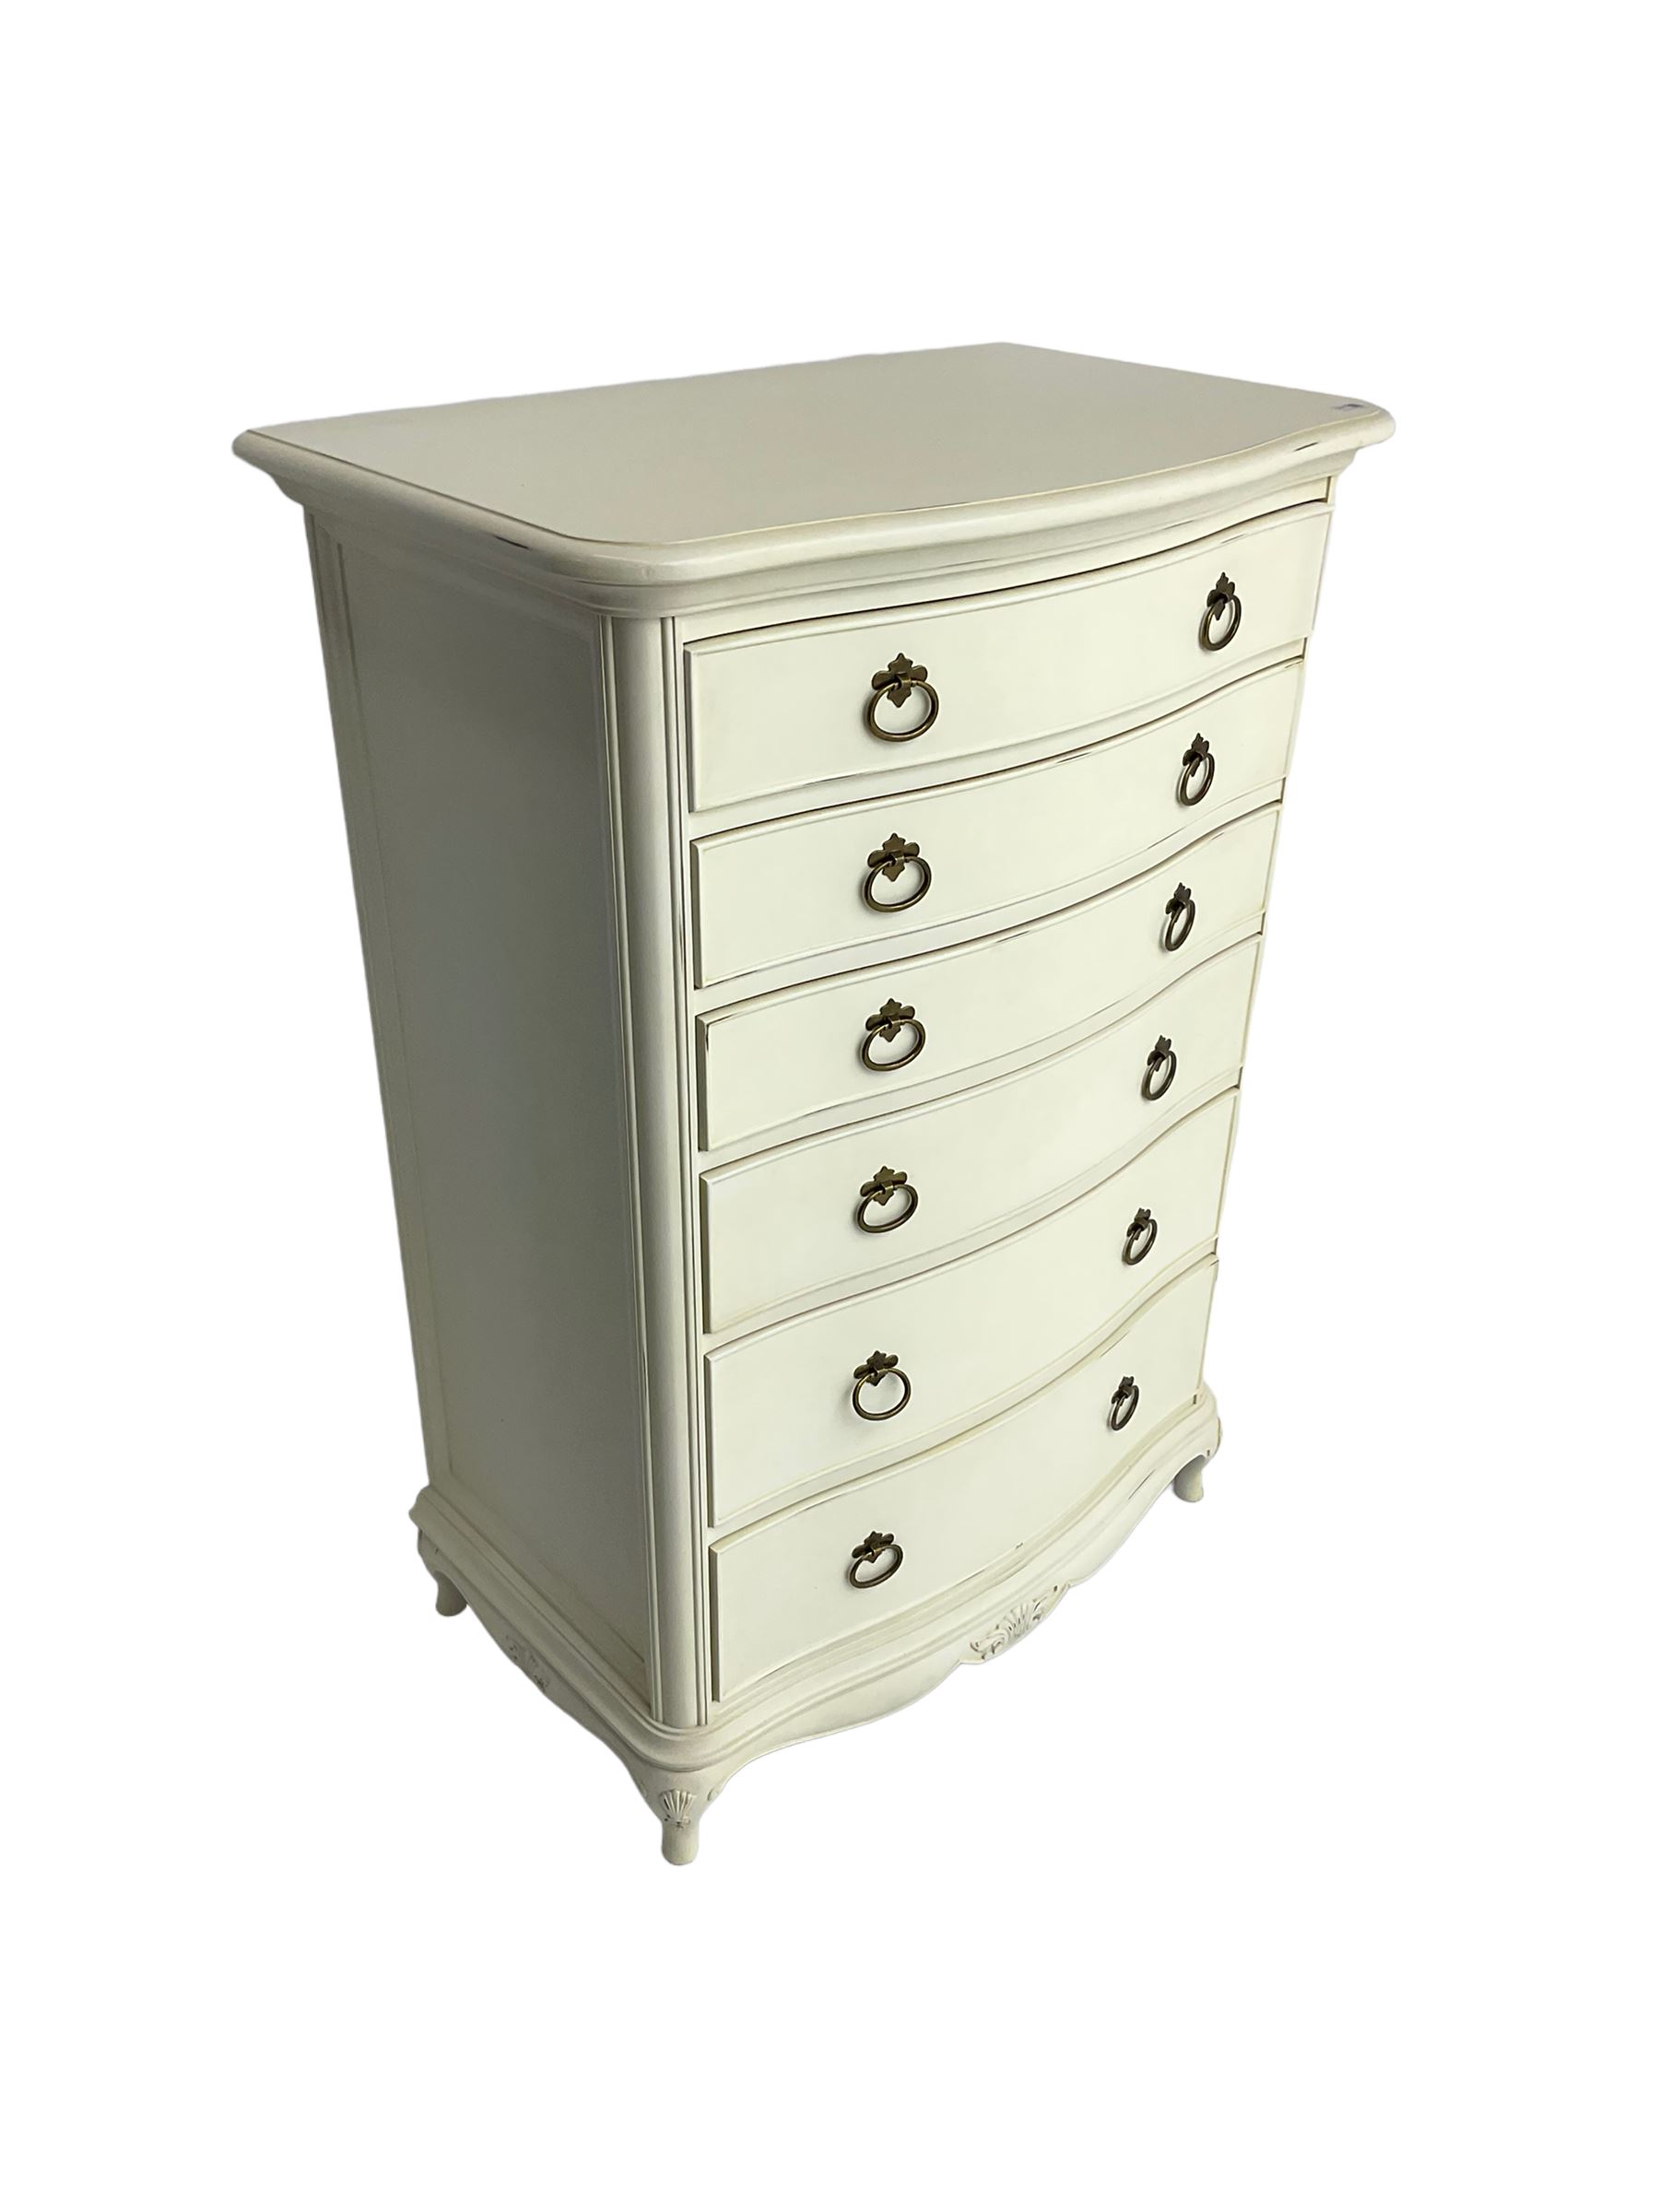 Willis and Gambier - chest fitted with graduating drawers - Image 3 of 6